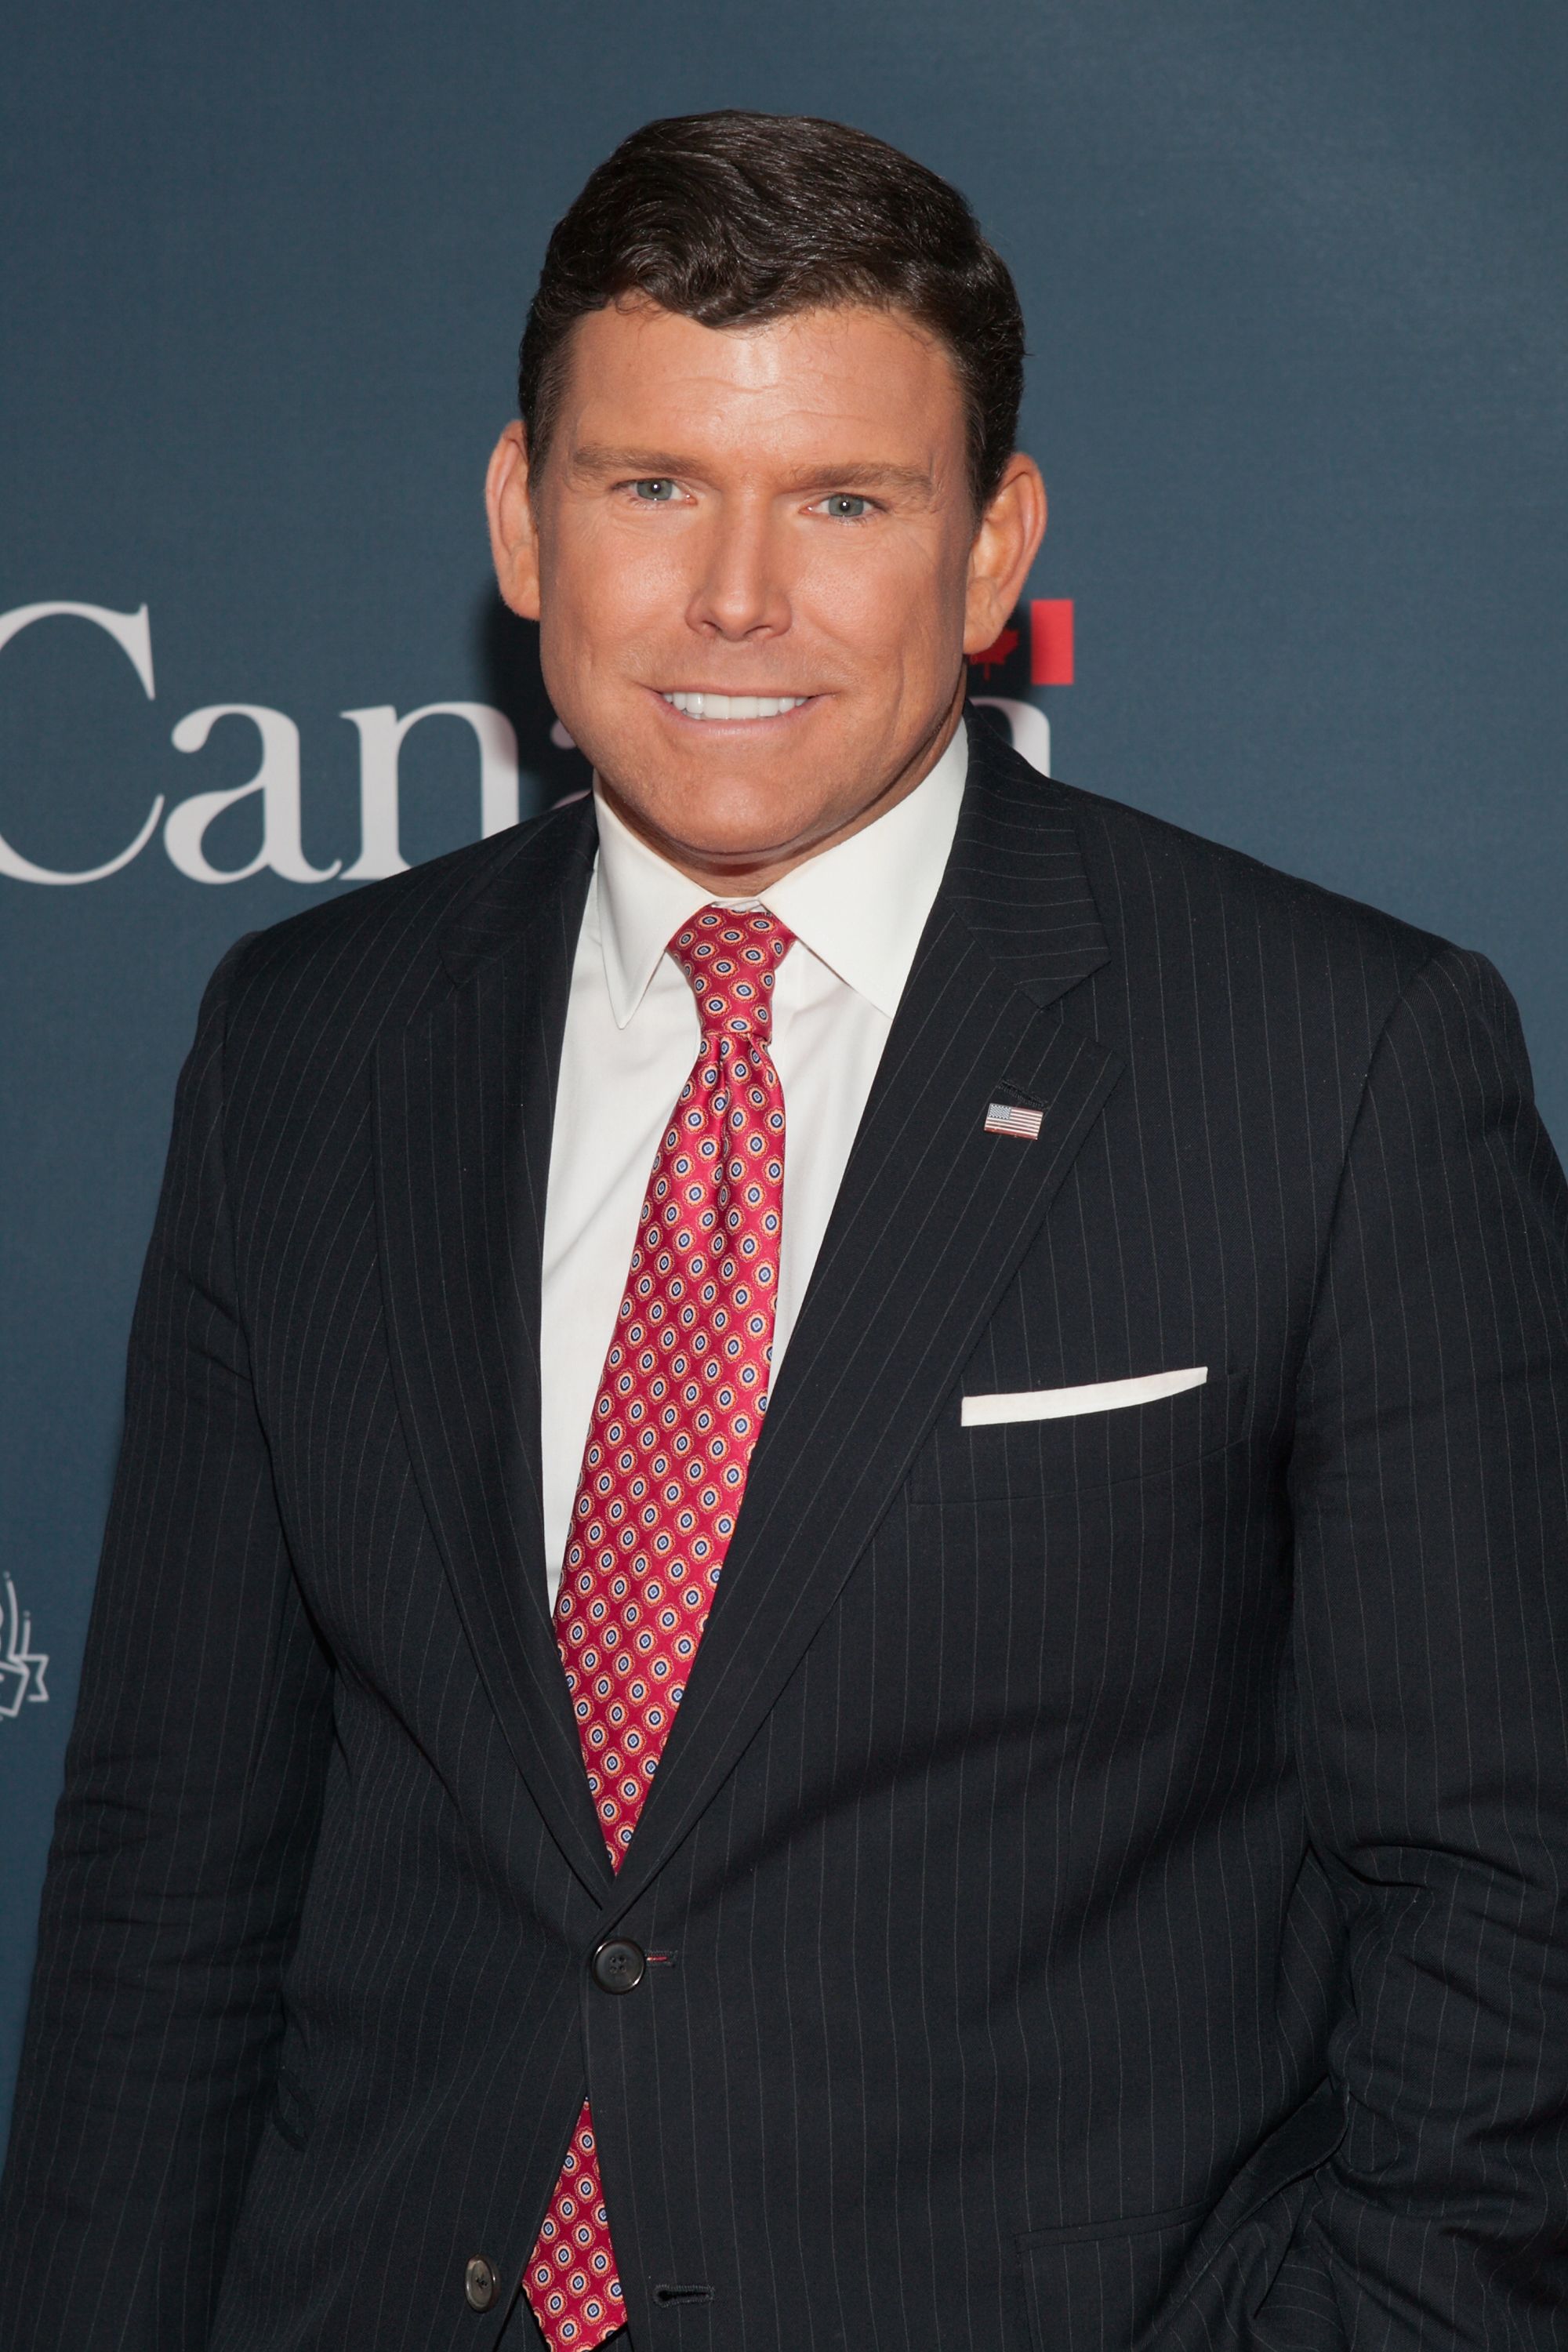 Bret Baier atThe Hill's and Entertainment Tonight's celebration of the 100th White House Correspondents' Association Dinner weekend on May 2, 2014 | Photo: Getty Images